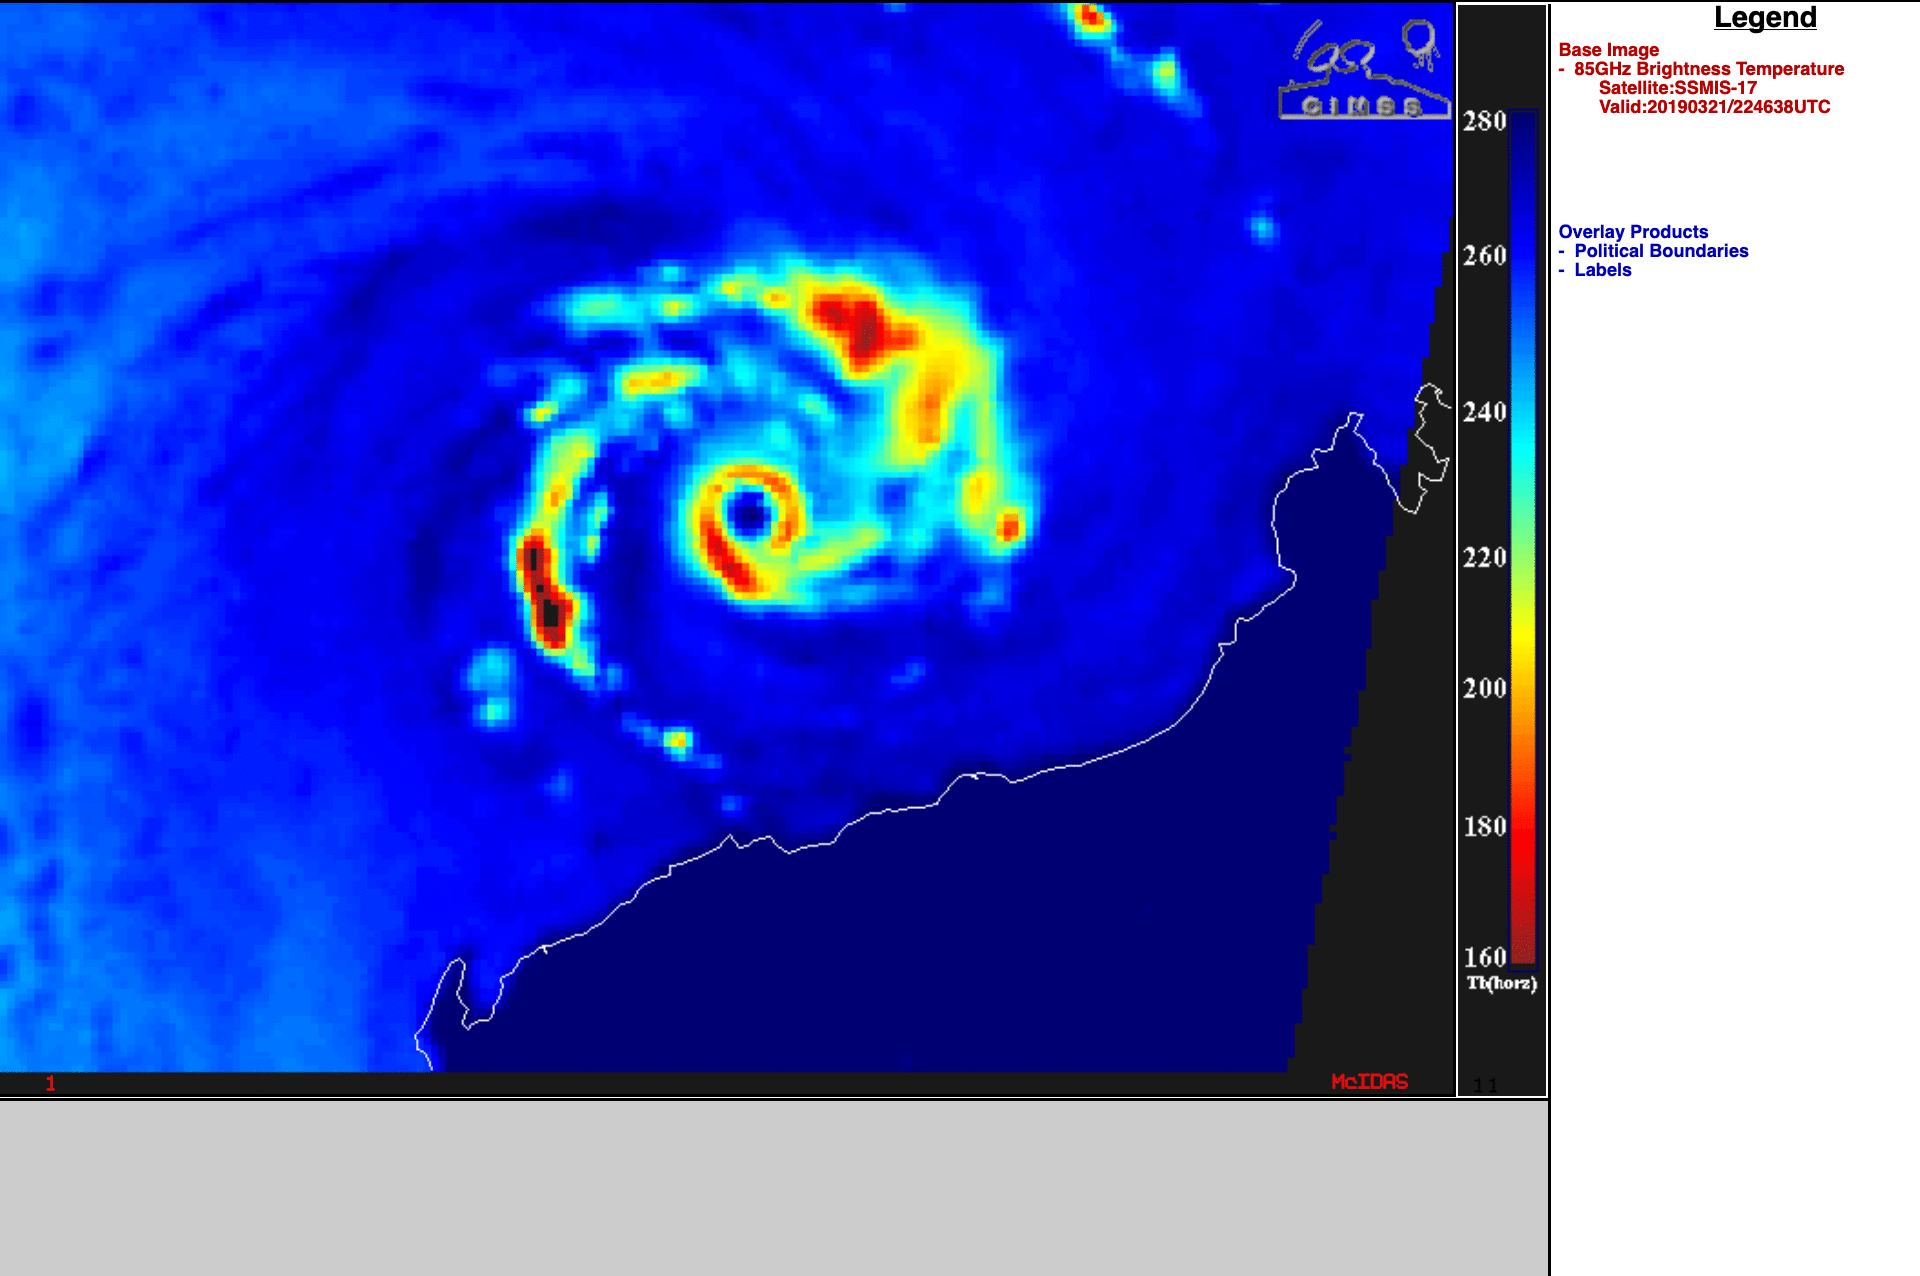 DMSP-17 SSMIS Microwave (85 GHz) image at 2246 UTC, with an overlay of 21 UTC deep-layer Wind Shear, and Sea Surface Temperature [click to enlarge]